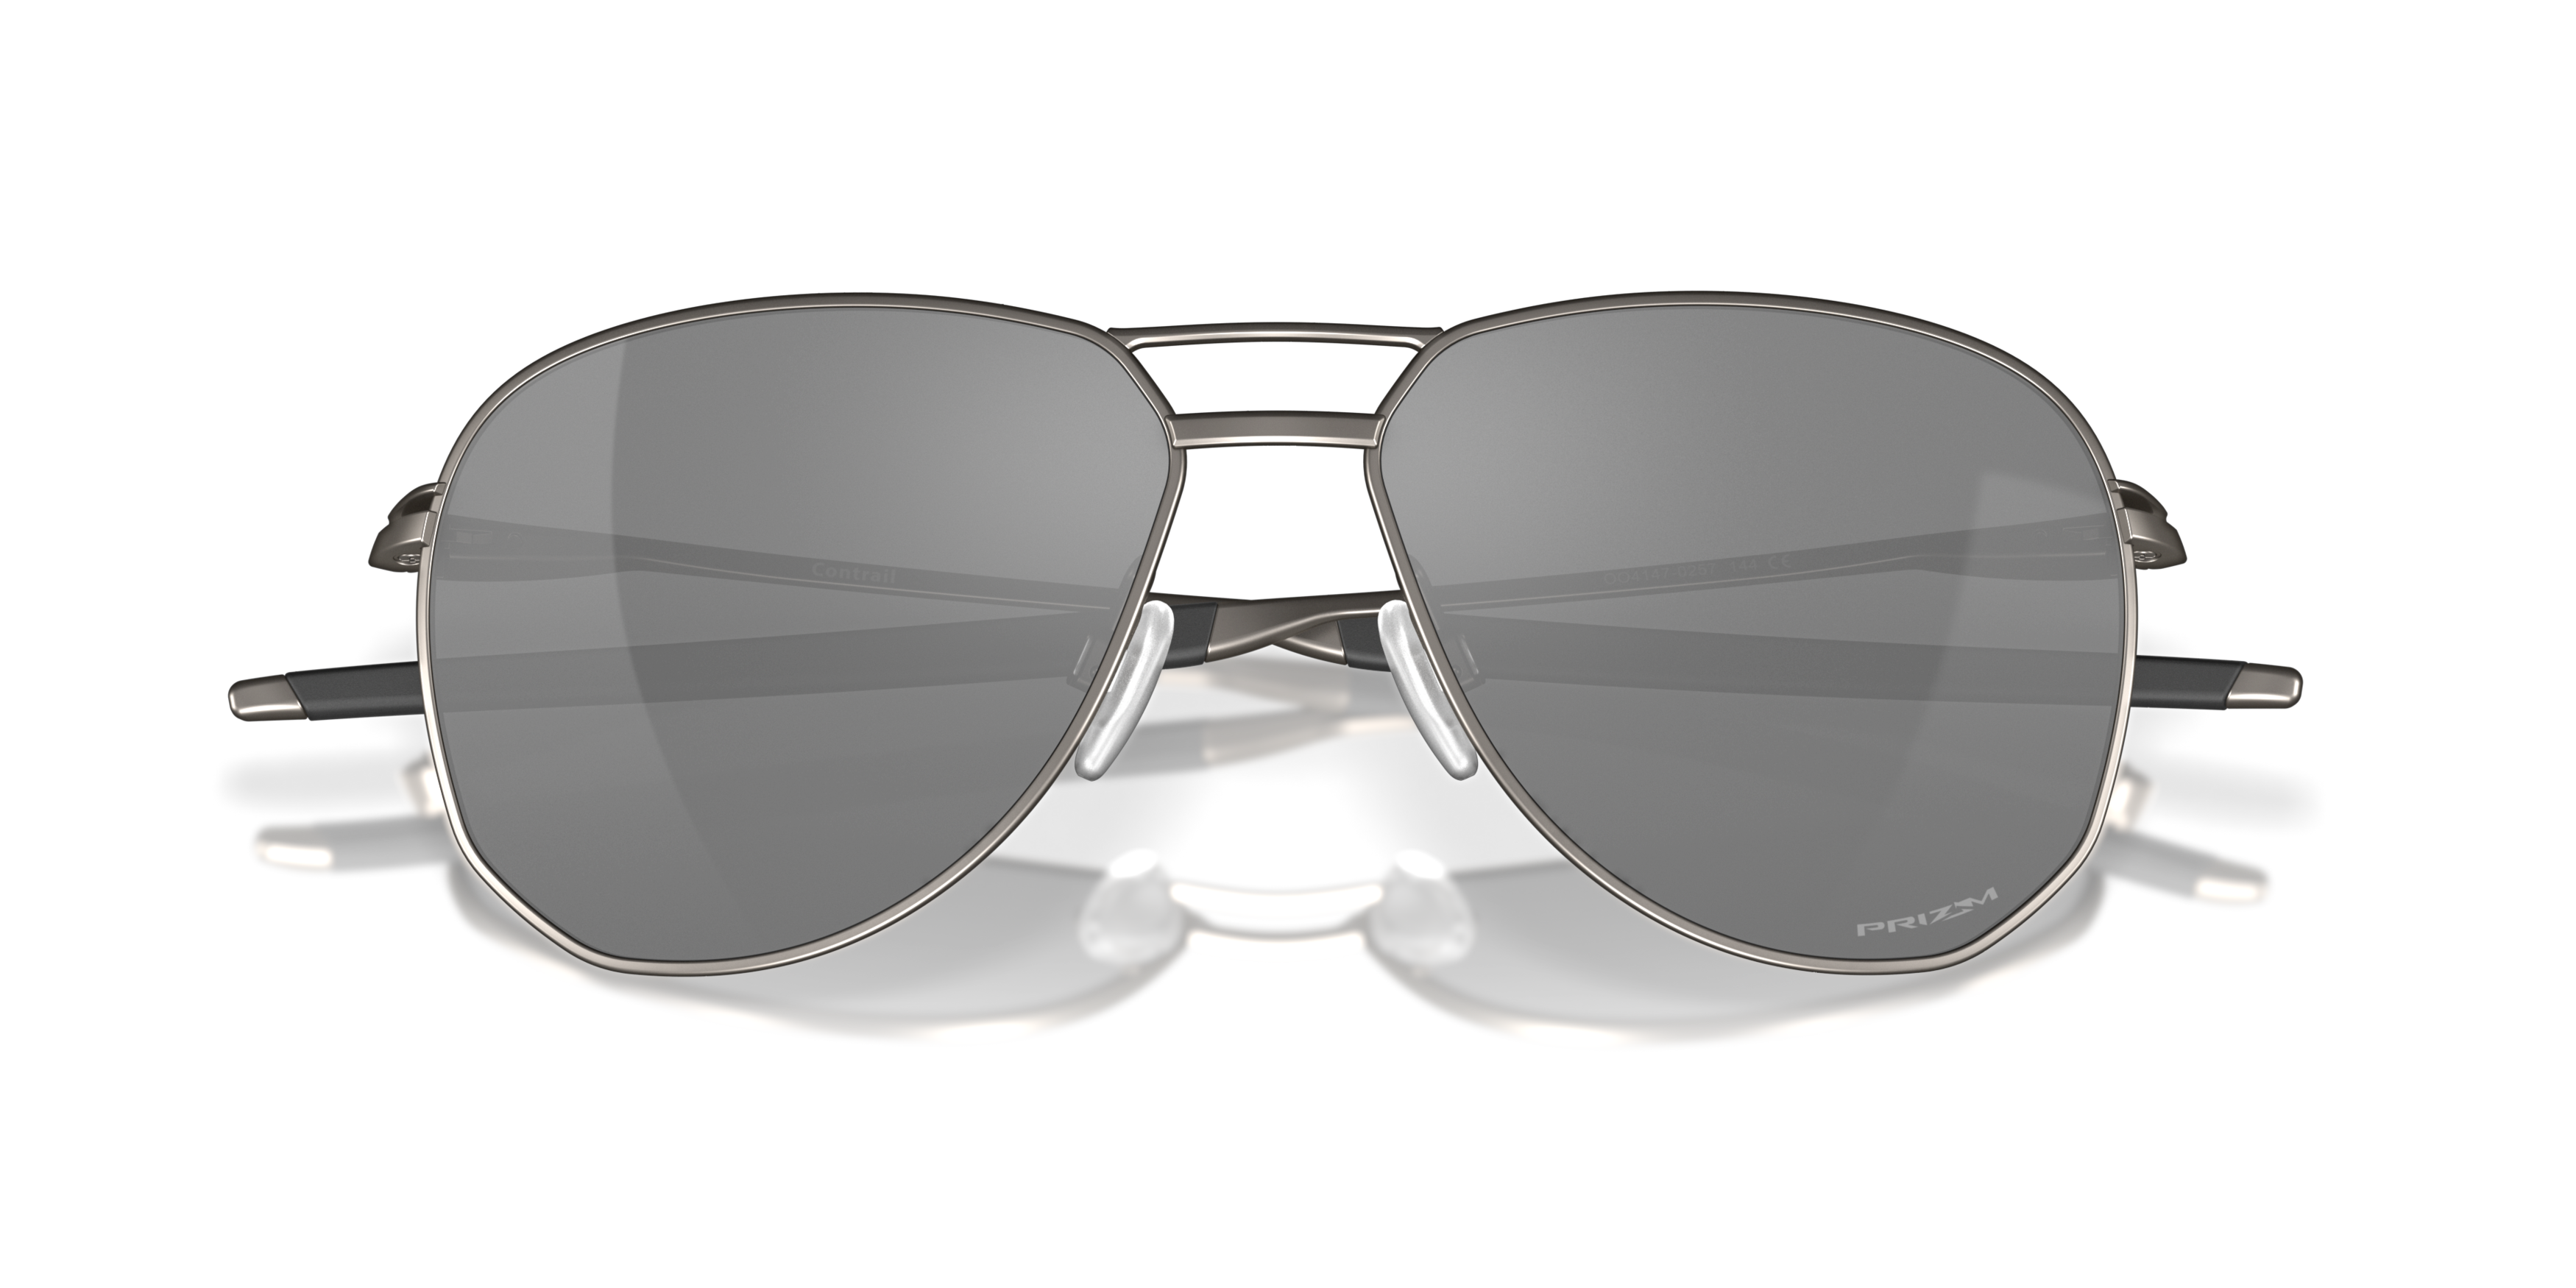 [products.image.folded] Oakley Contrail OO4147 0257